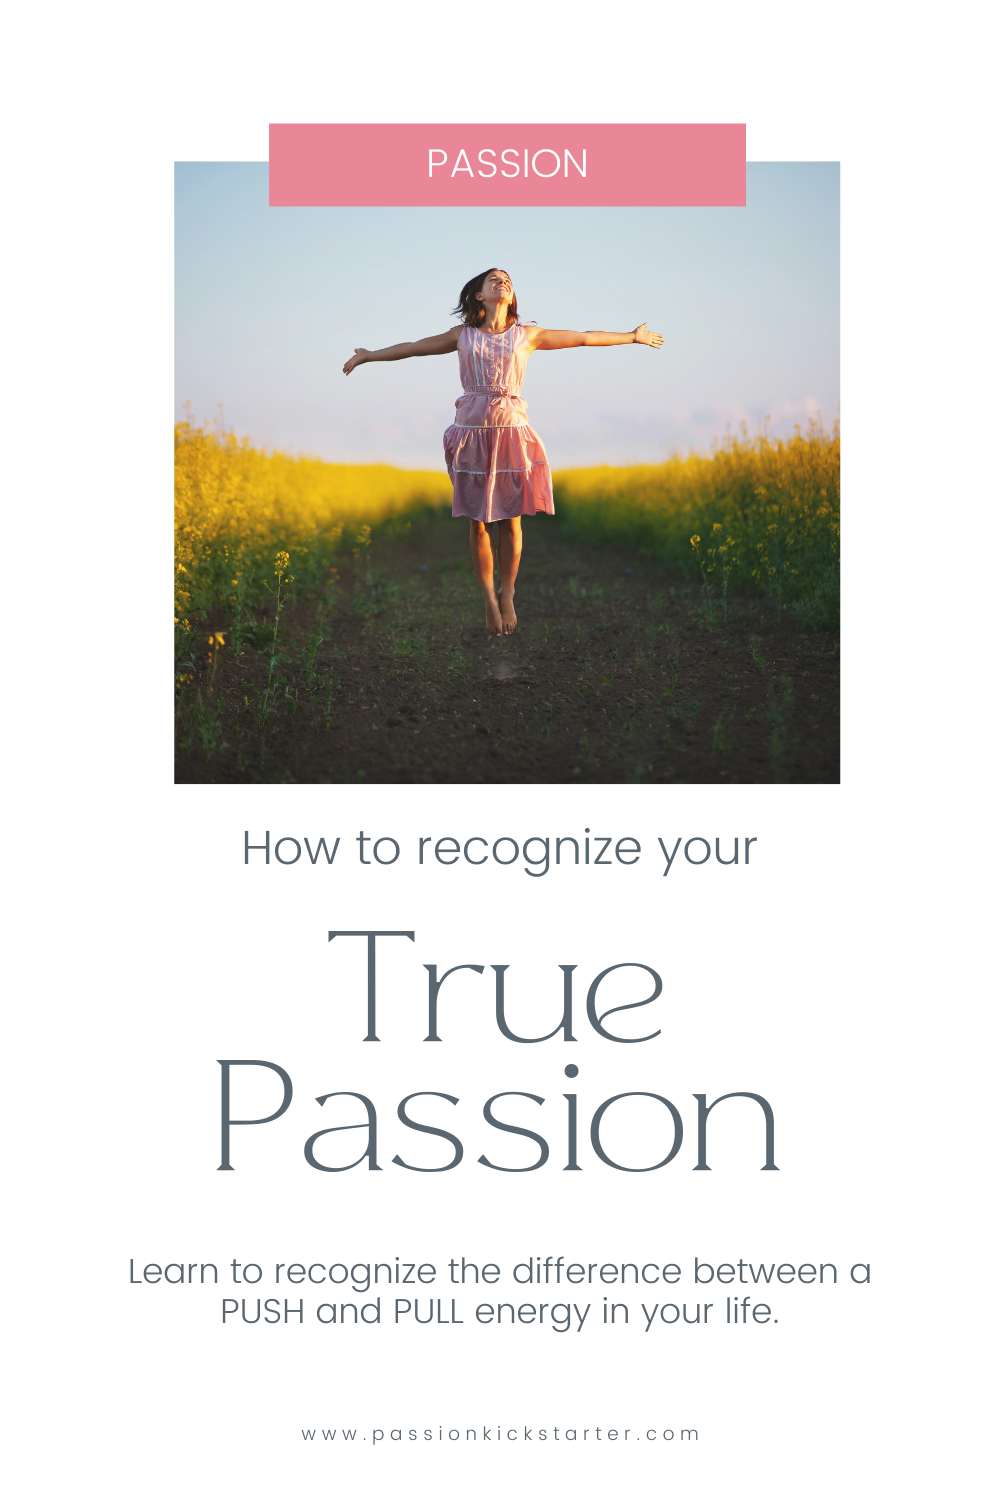 How to recognize your true passion